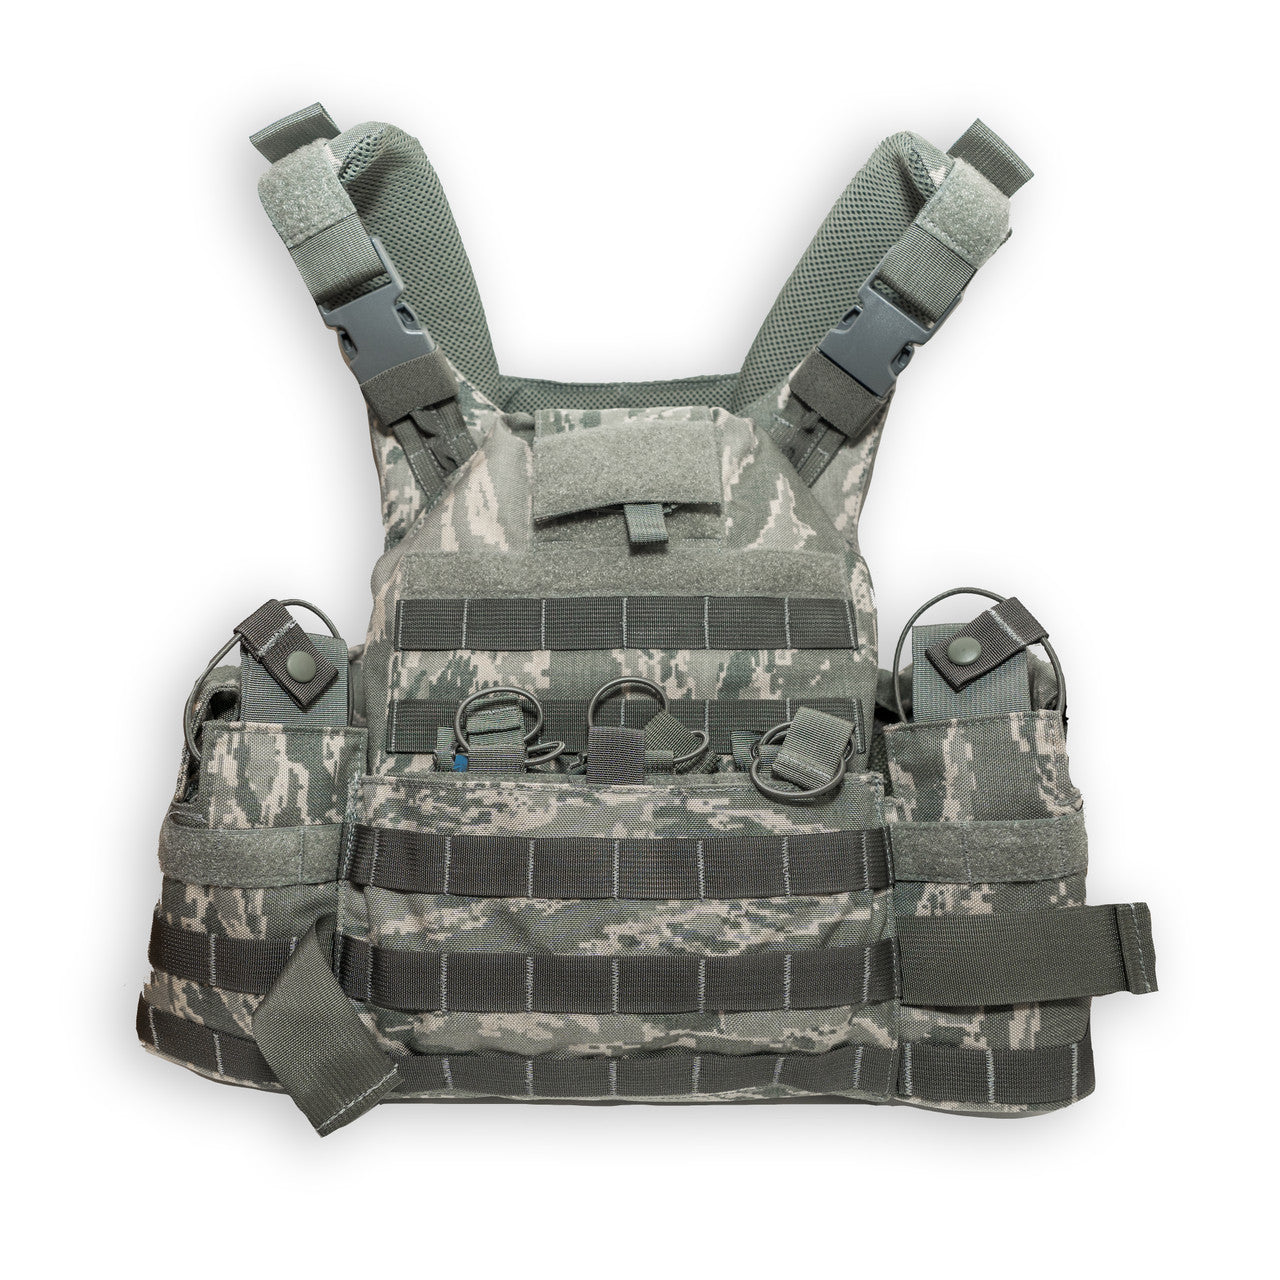 T3 Geronimo 2 Plate Carrier with Quad Release System - ABU Tiger - FINAL SALE